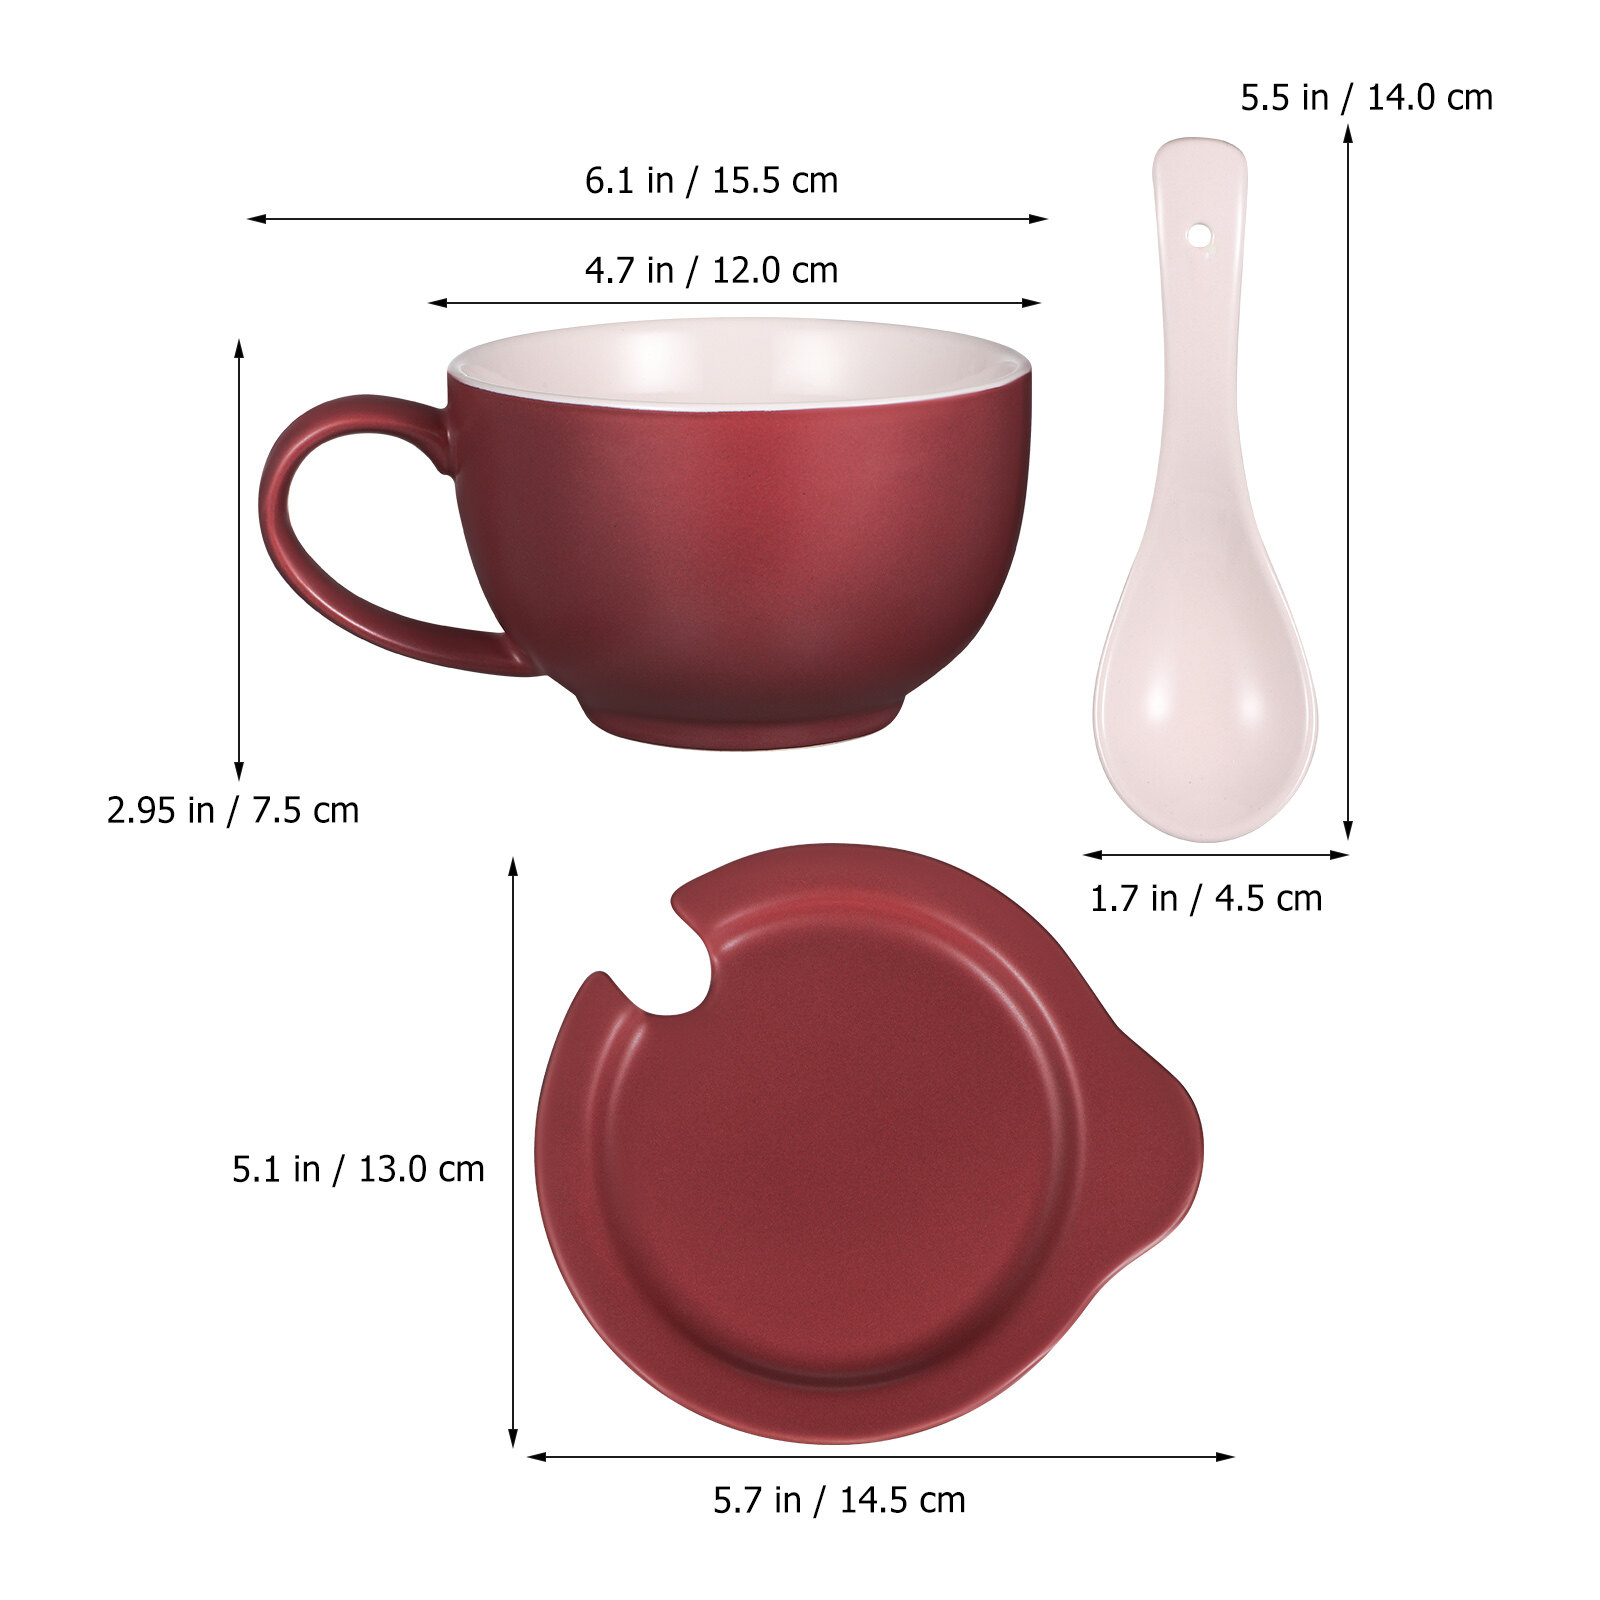 Ceramic Mug Set 480ml Large Capacity Coffee Mug Breakfast Cup with Lid and Spoon for Milk Cereal Oatmeal - image 2 of 8